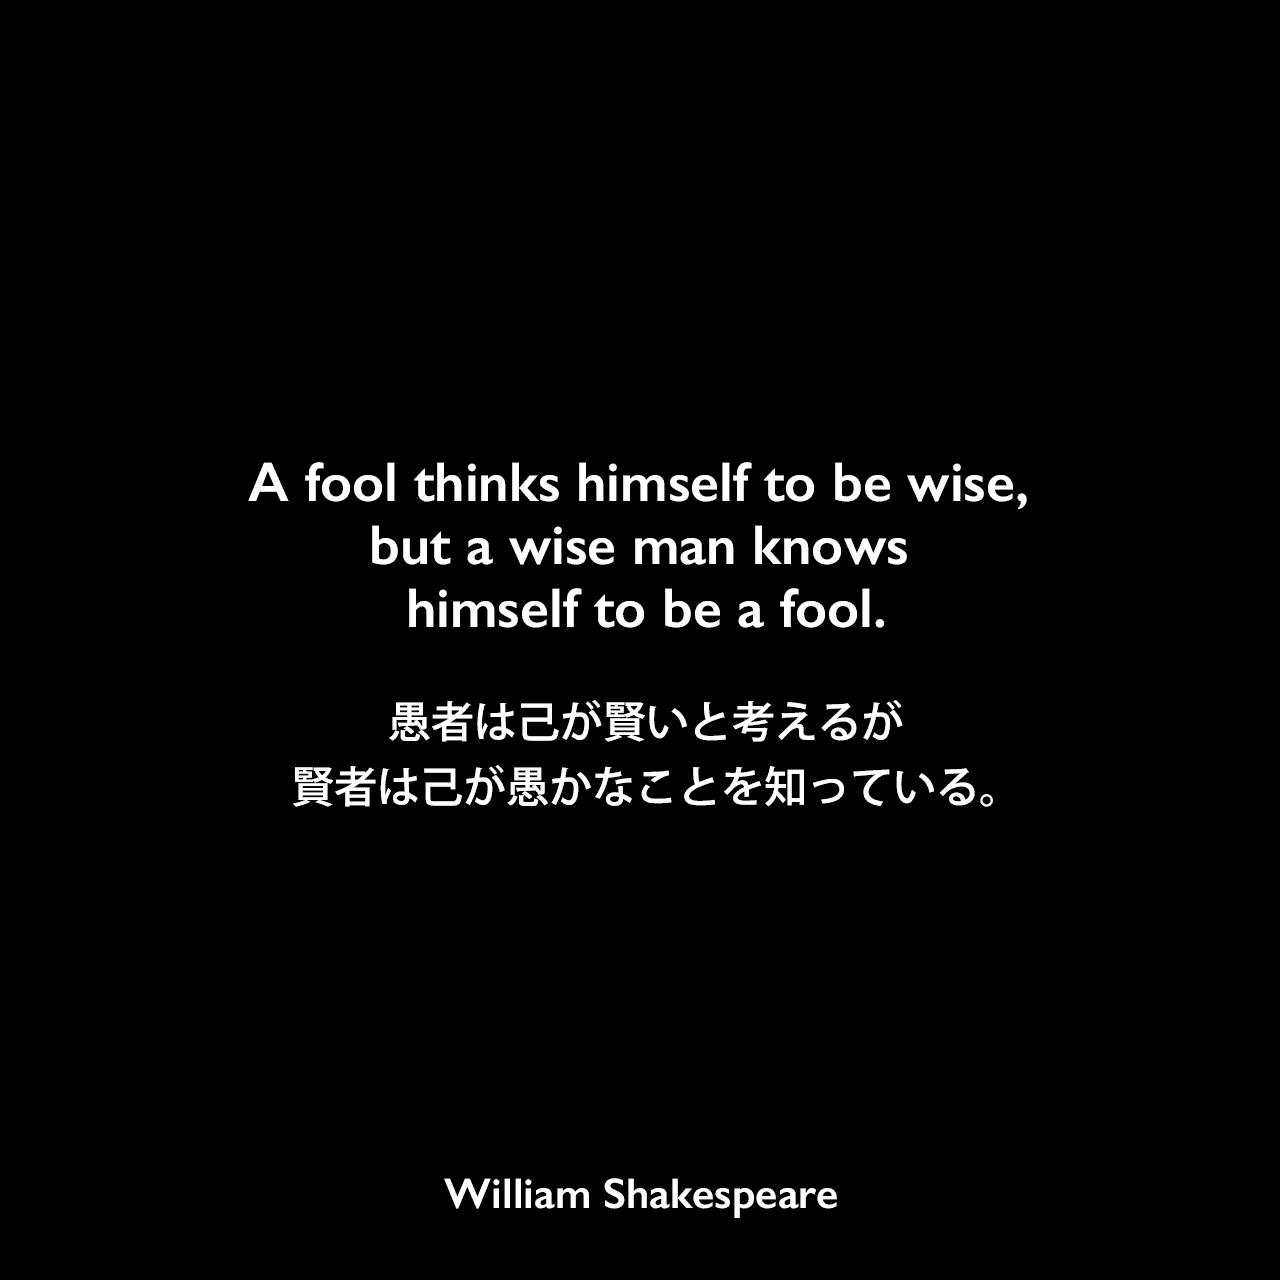 A fool thinks himself to be wise, but a wise man knows himself to be a fool.愚者は己が賢いと考えるが、賢者は己が愚かなことを知っている。William Shakespeare